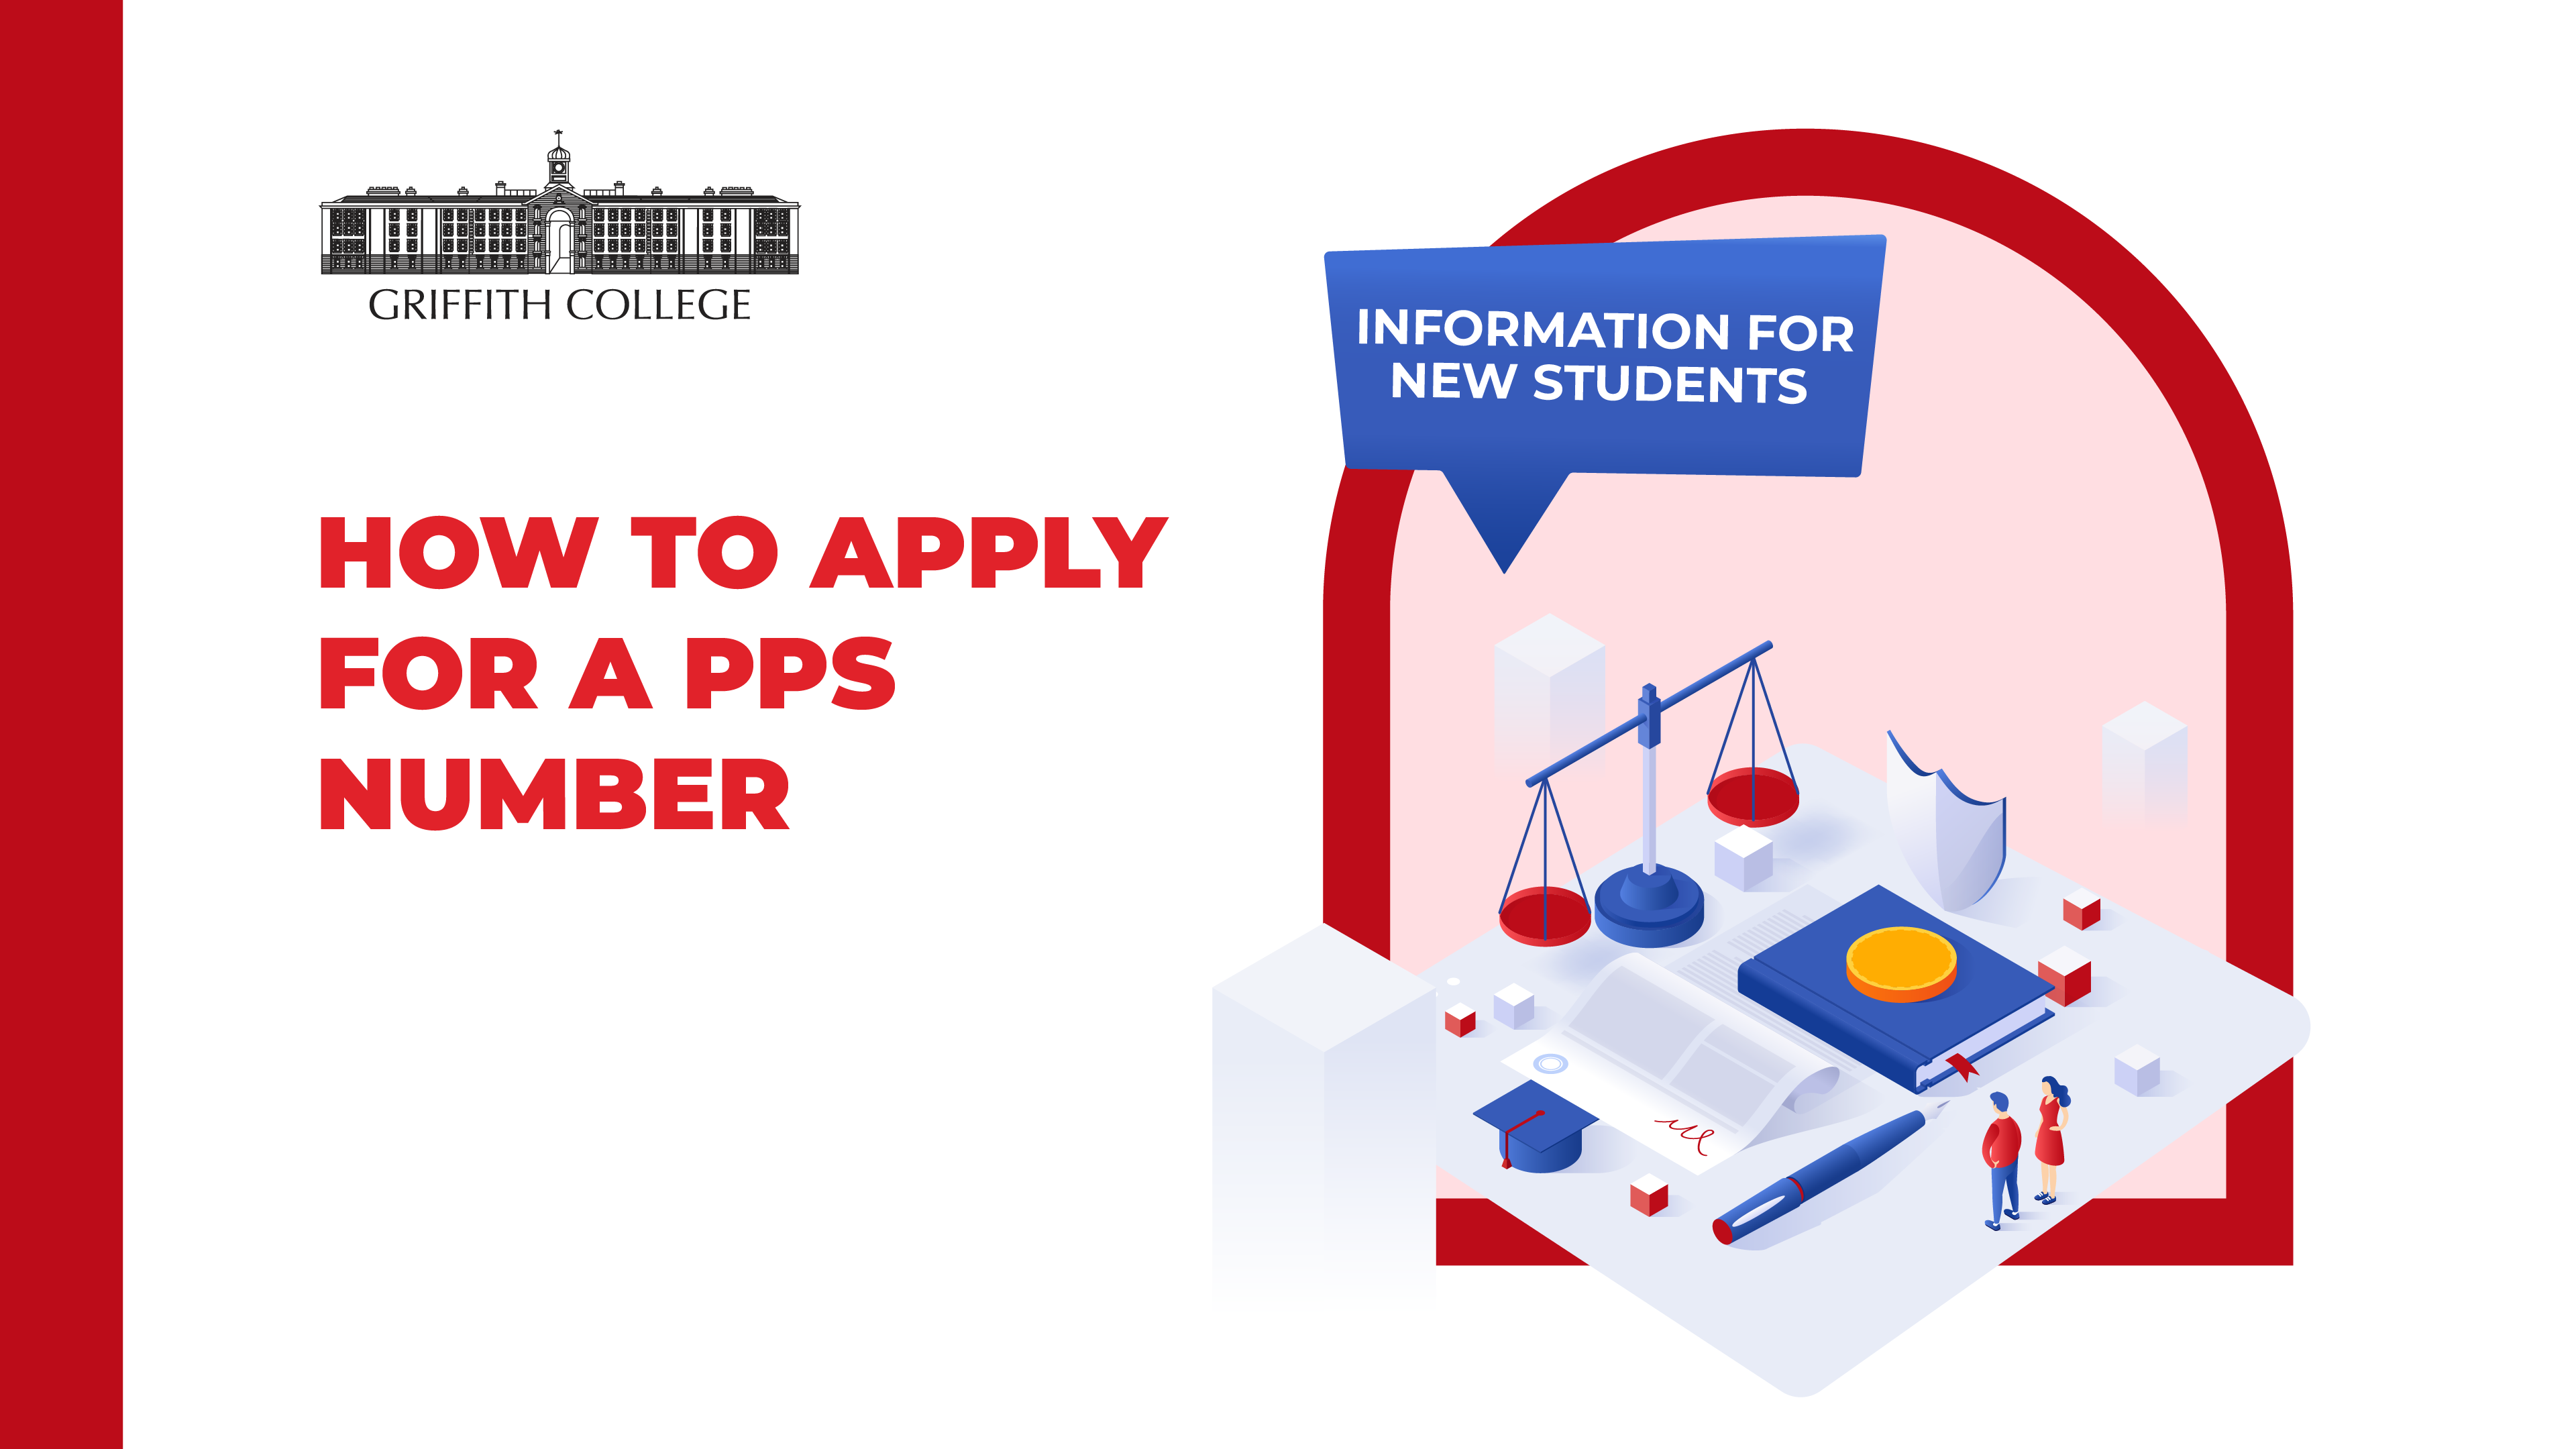 How to Apply for a PPS Number